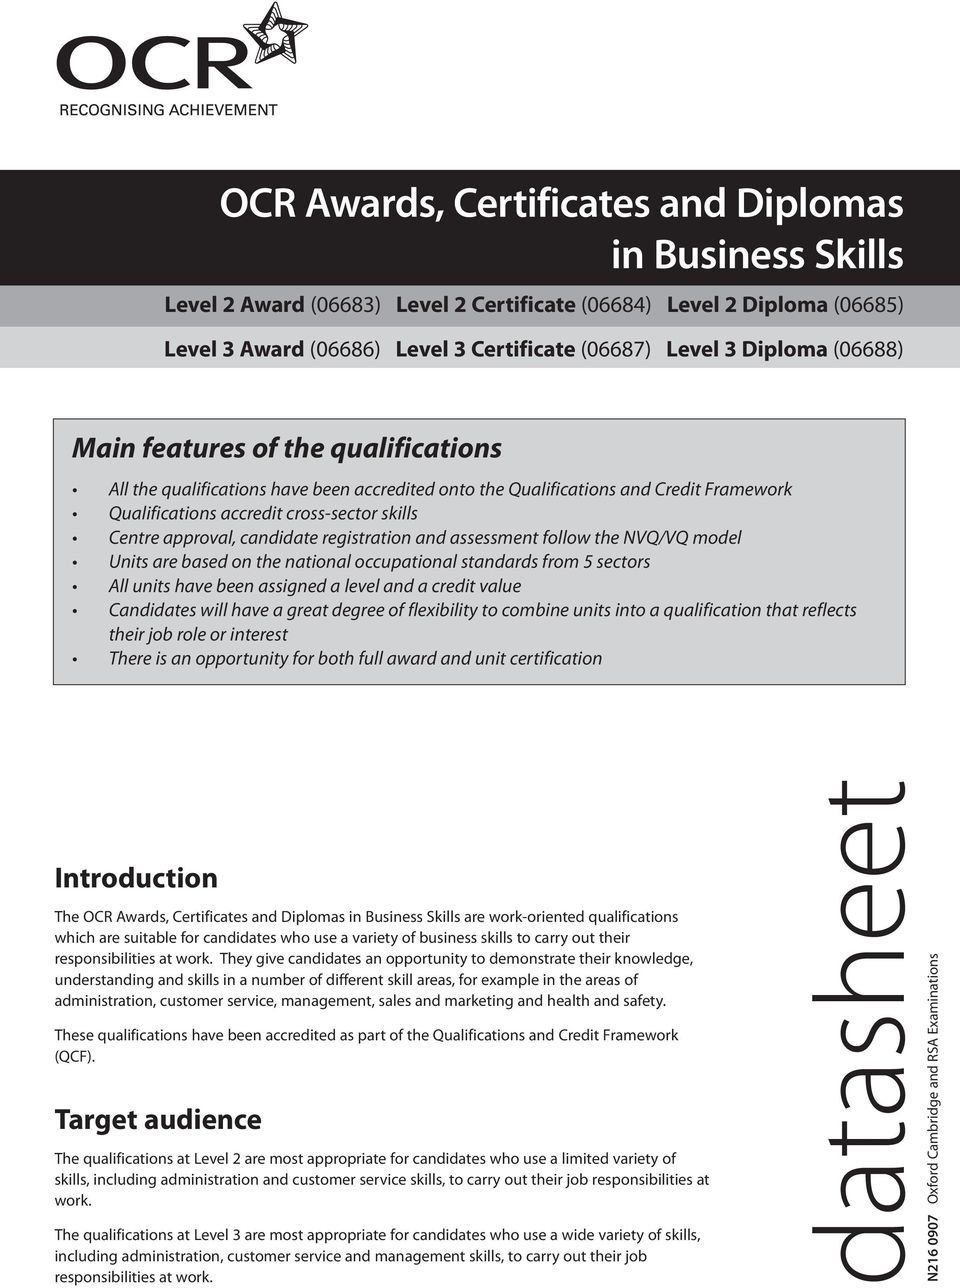 candidate registration and assessment follow the NVQ/VQ model Units are based on the national occupational standards from 5 sectors All units have been assigned a level and a credit value Candidates